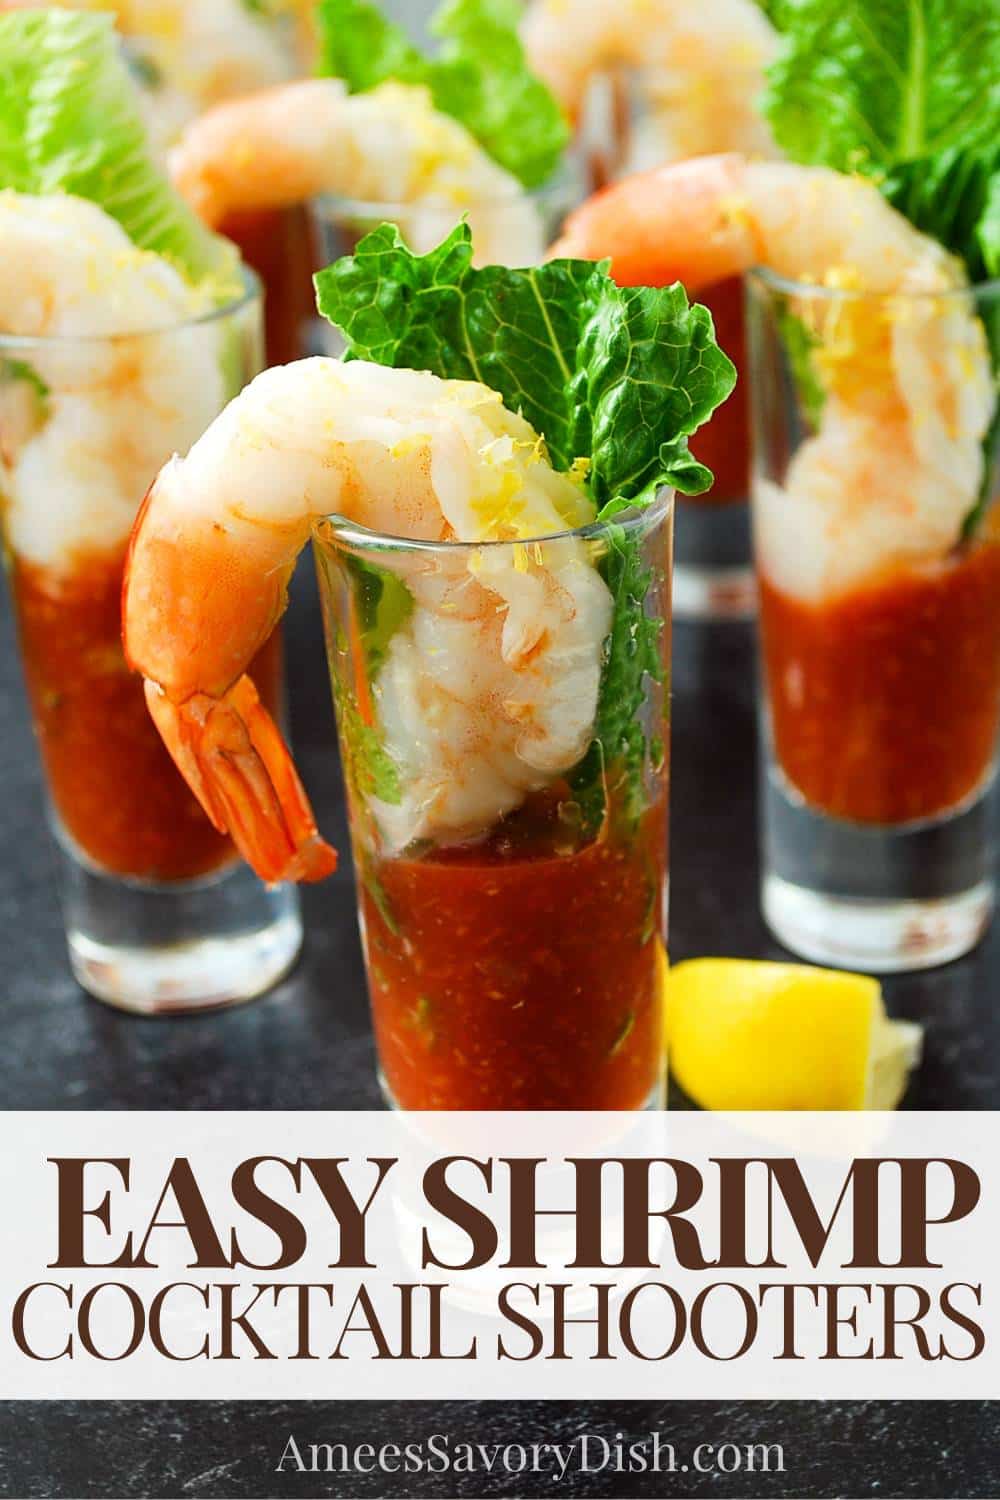 A simple, yet elegant recipe for shrimp shooters with a homemade cocktail sauce. Perfect for your next party or holiday gathering! via @Ameessavorydish